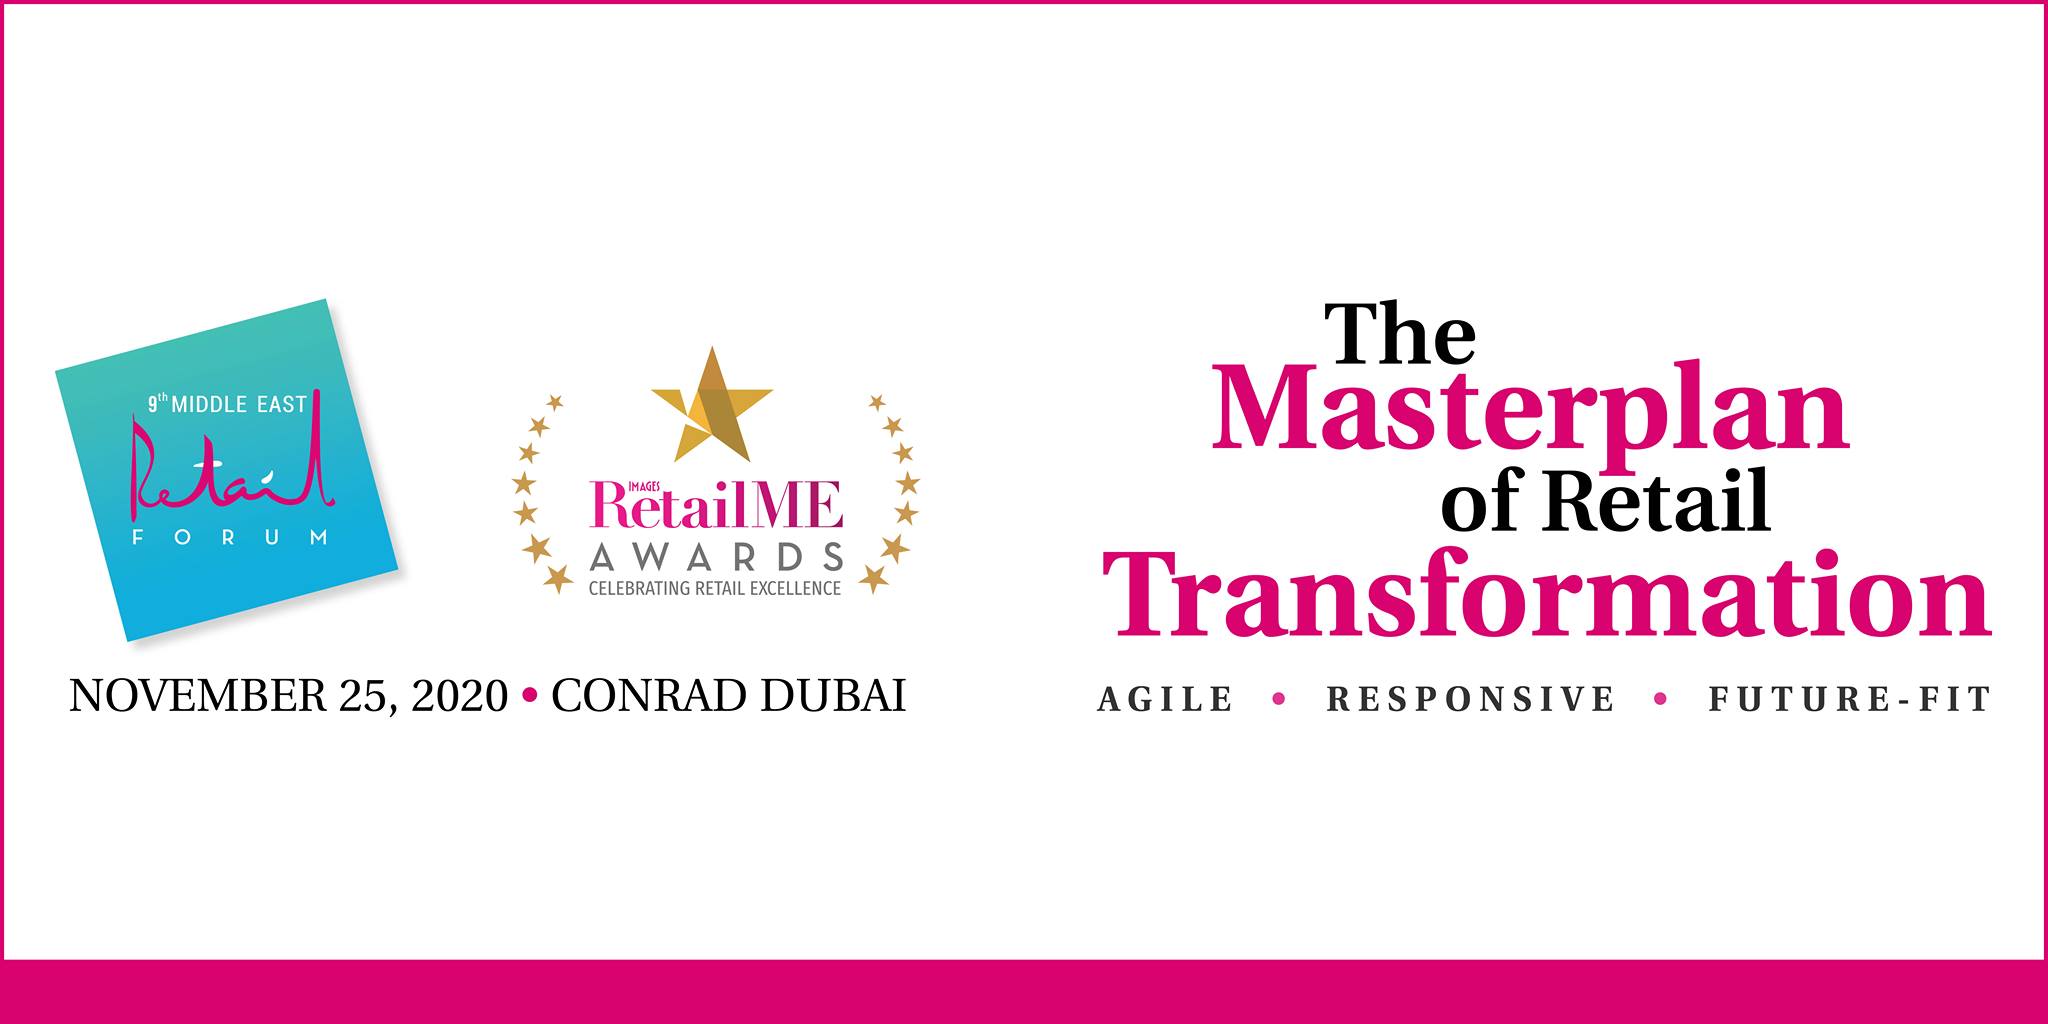 Middle East Retail Forum – The Masterplan of Retail Transformation - Coming Soon in UAE